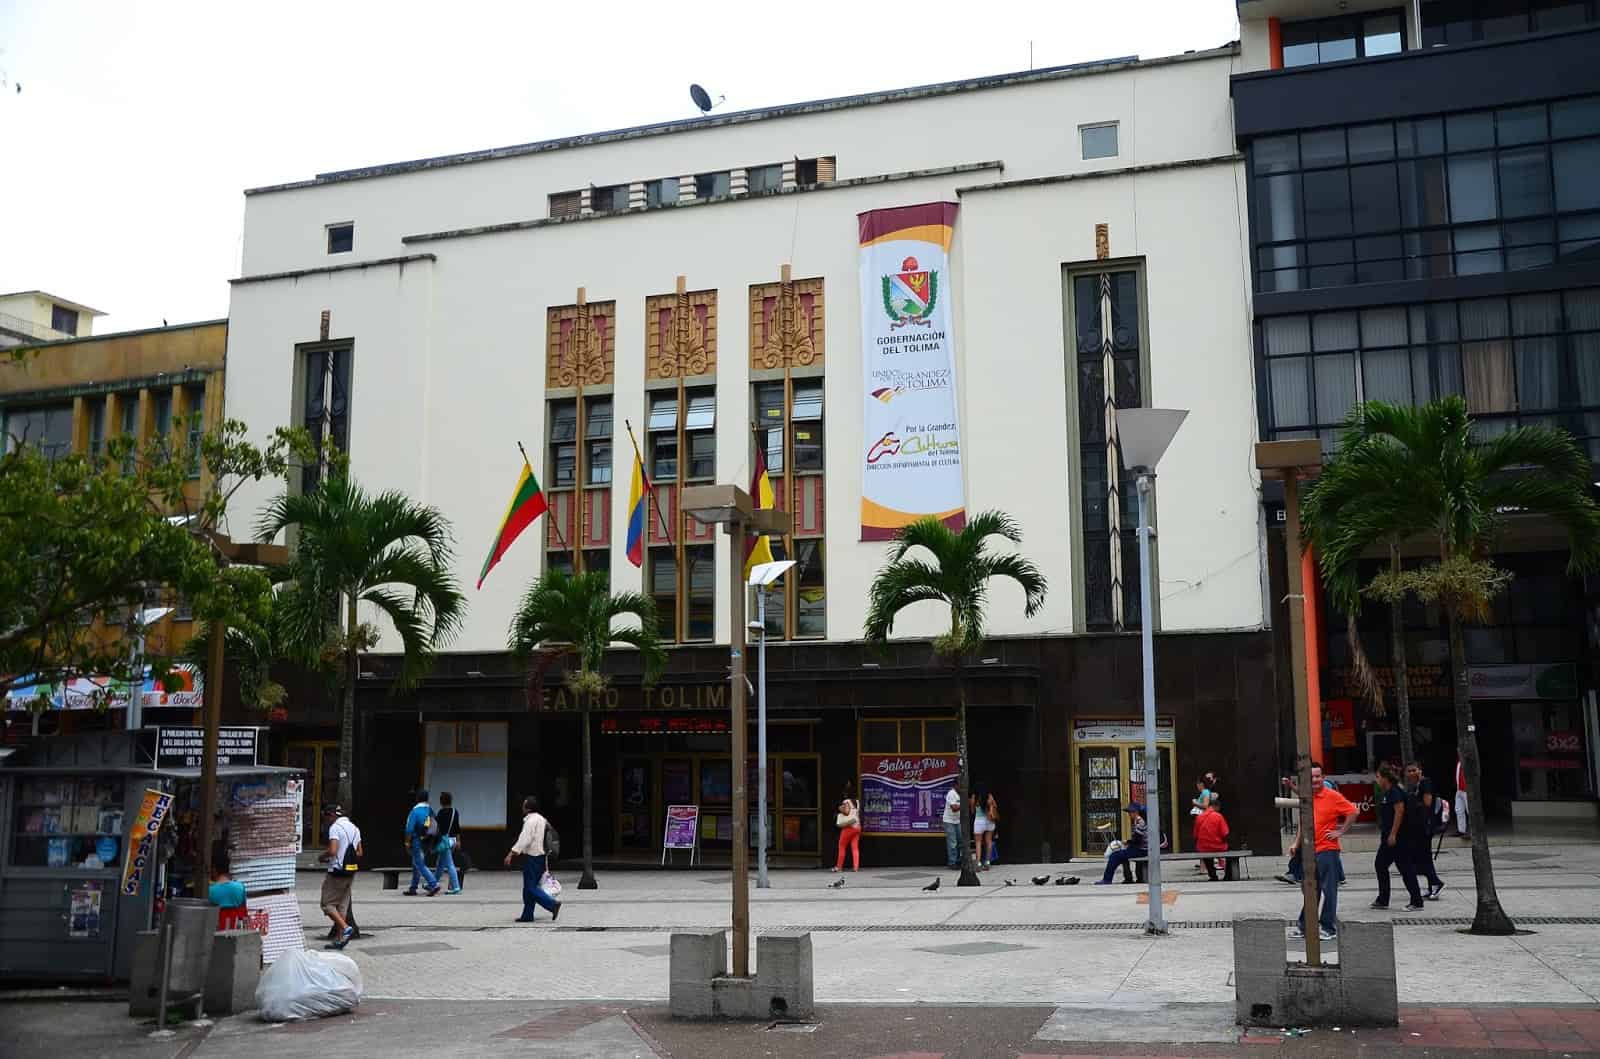 Tolima Theatre in Ibagué, Tolima, Colombia